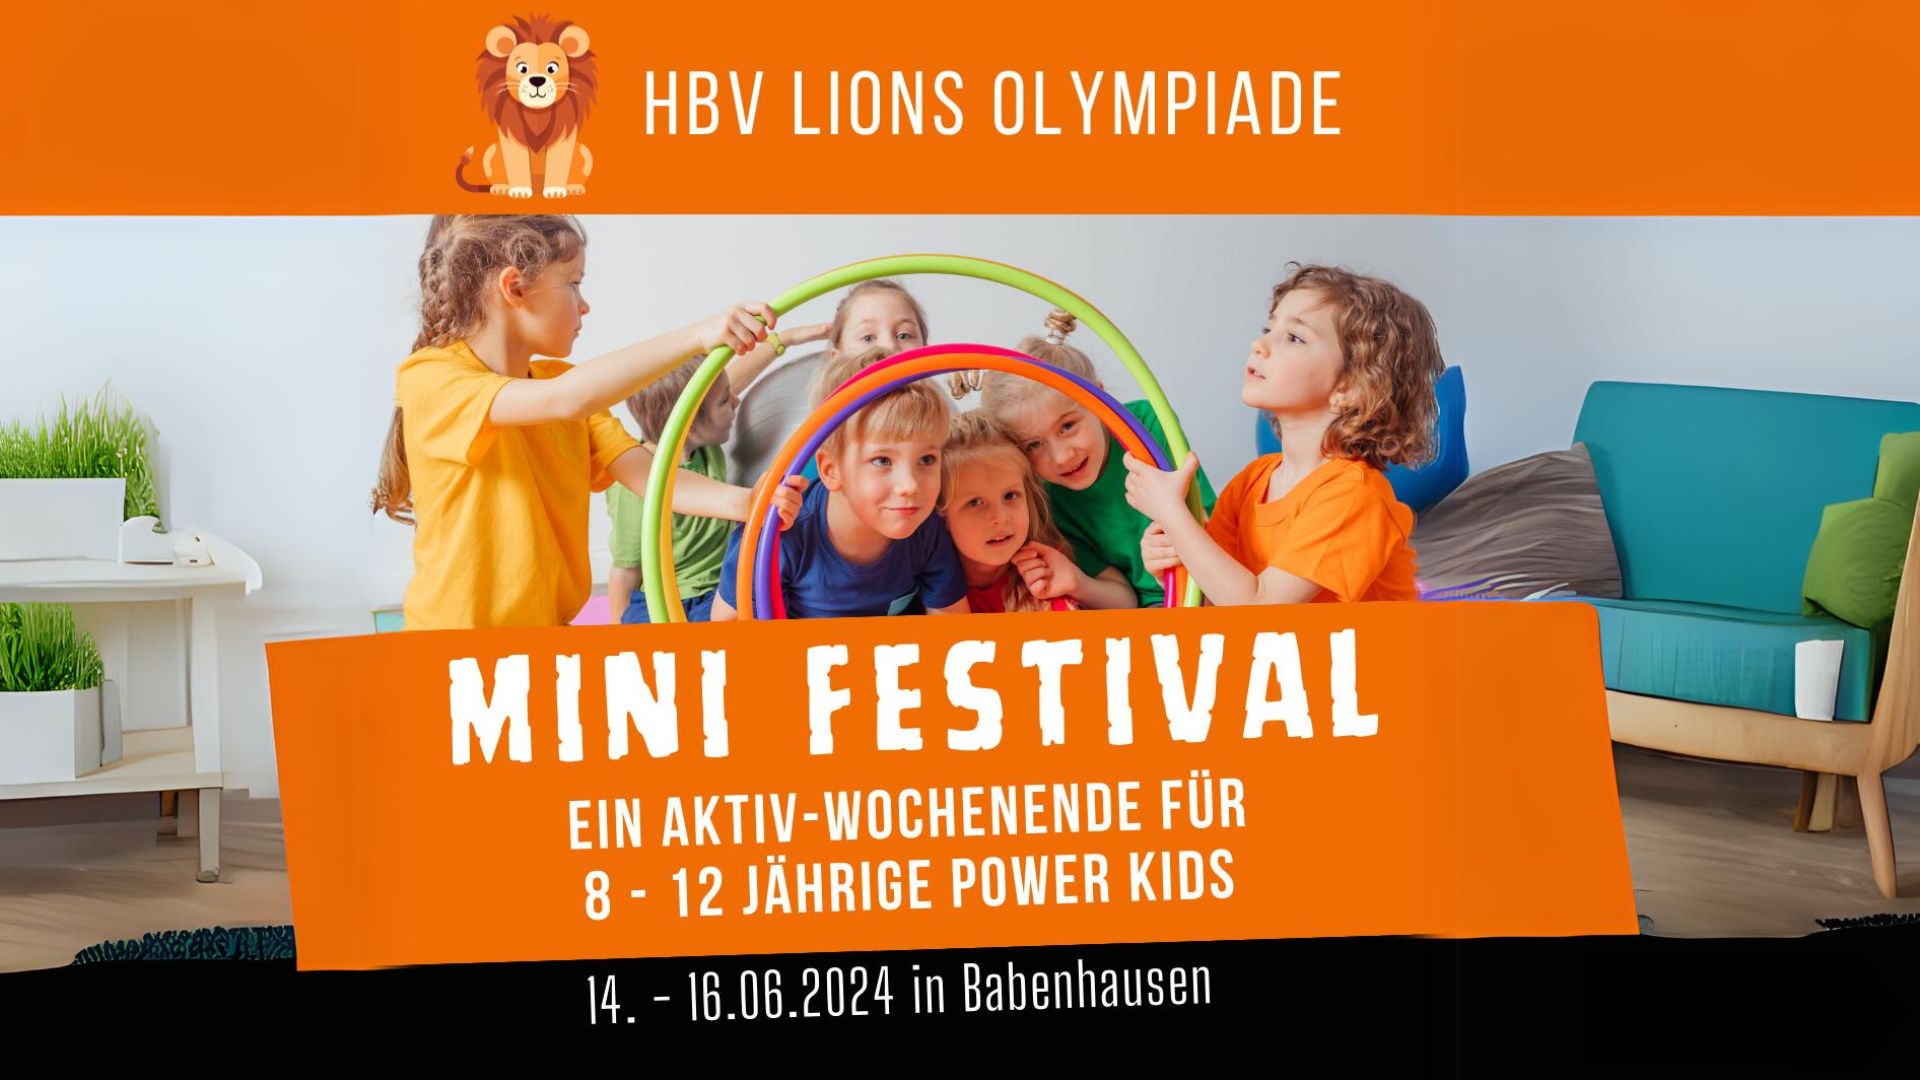 LIONS Olympiade 14.-16.06.2024 in Babenhausen